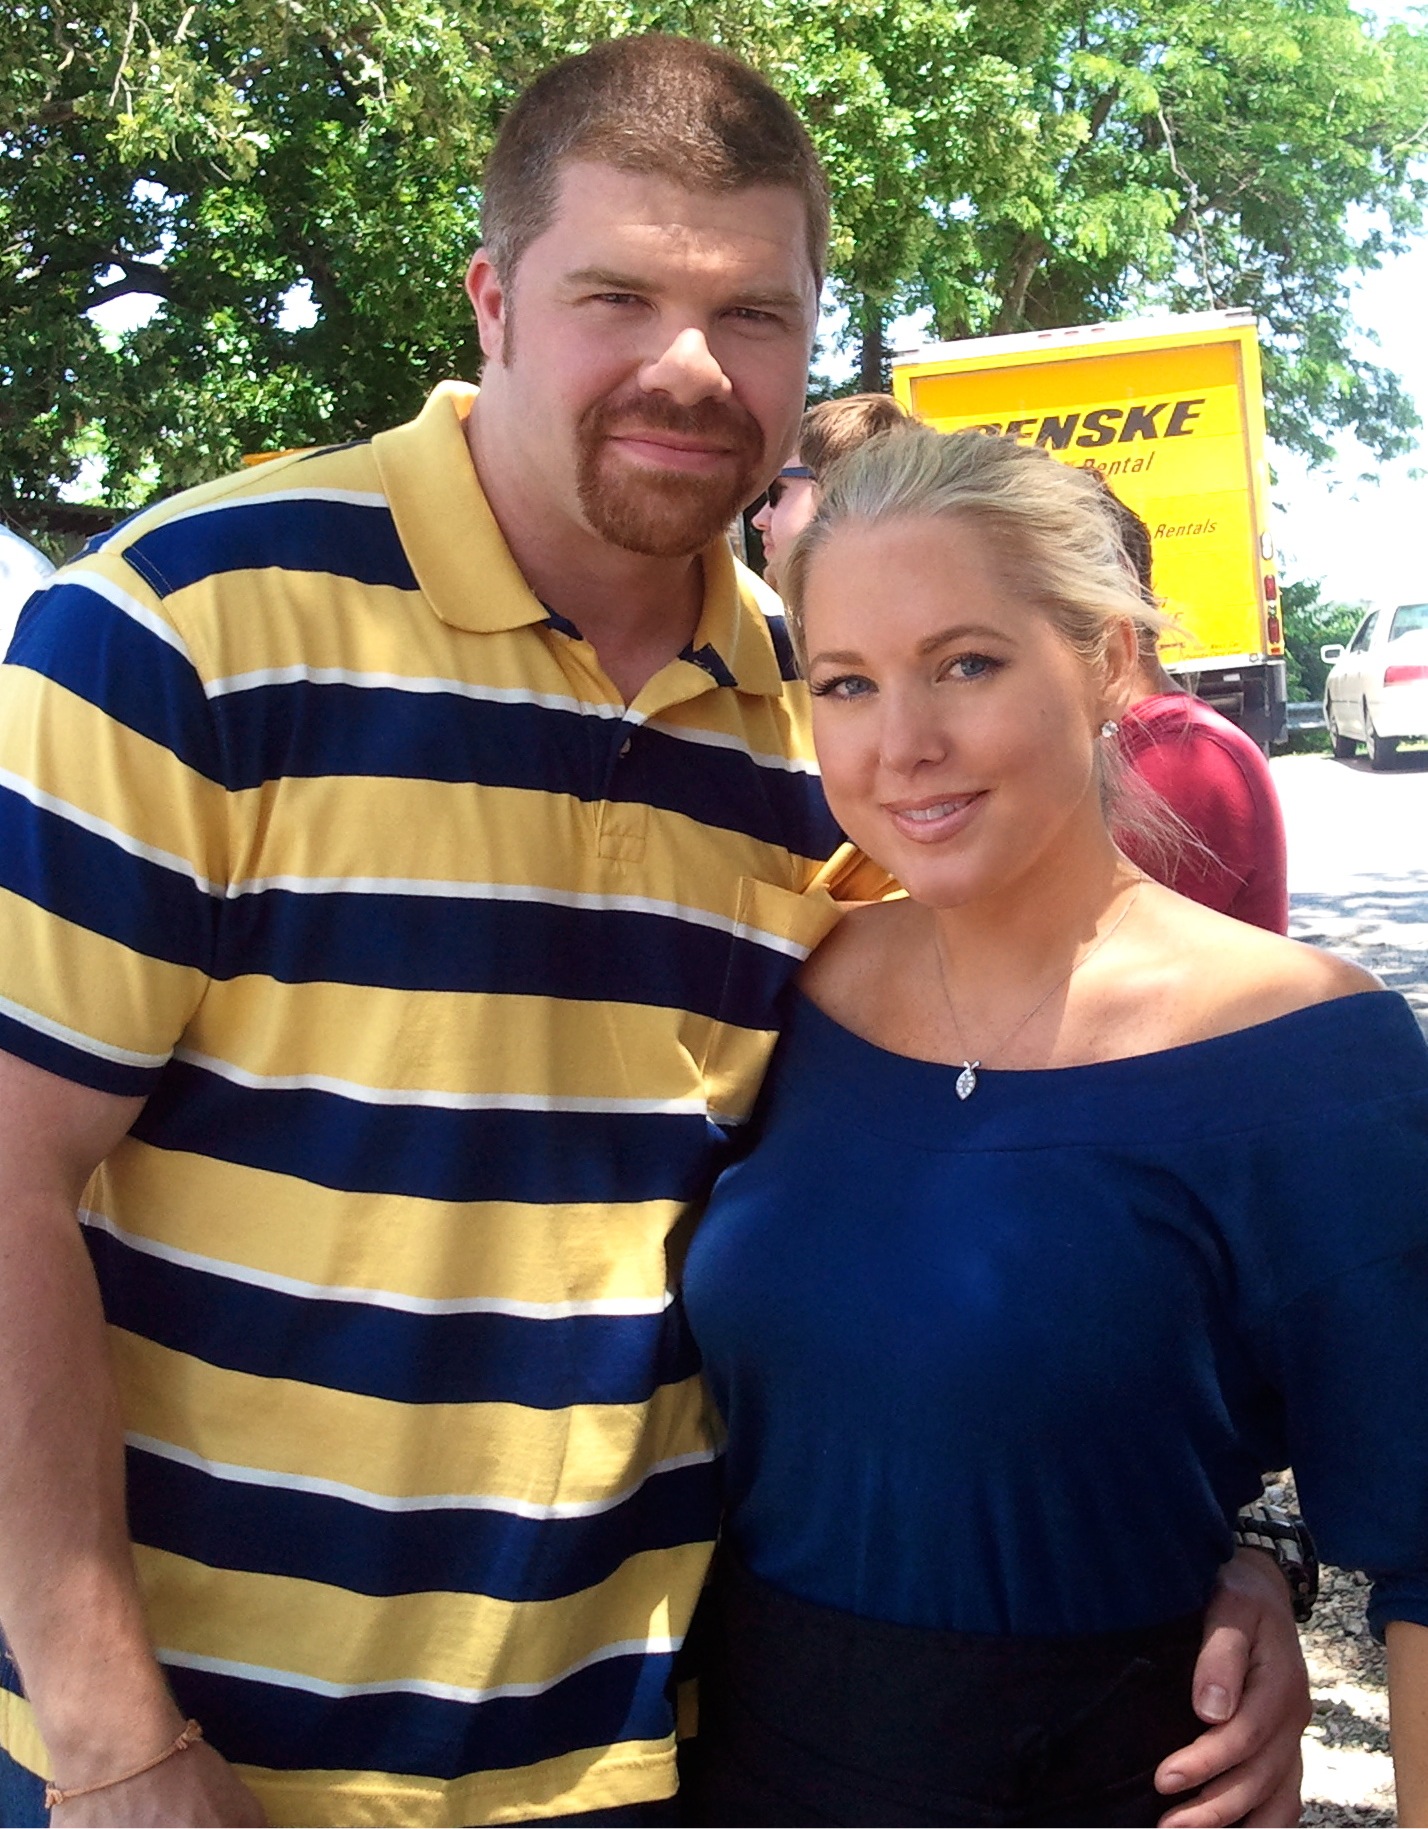 Josh Emerson and Tammy Barr on the set of Greater (2014) on location in Fayetteville, AR